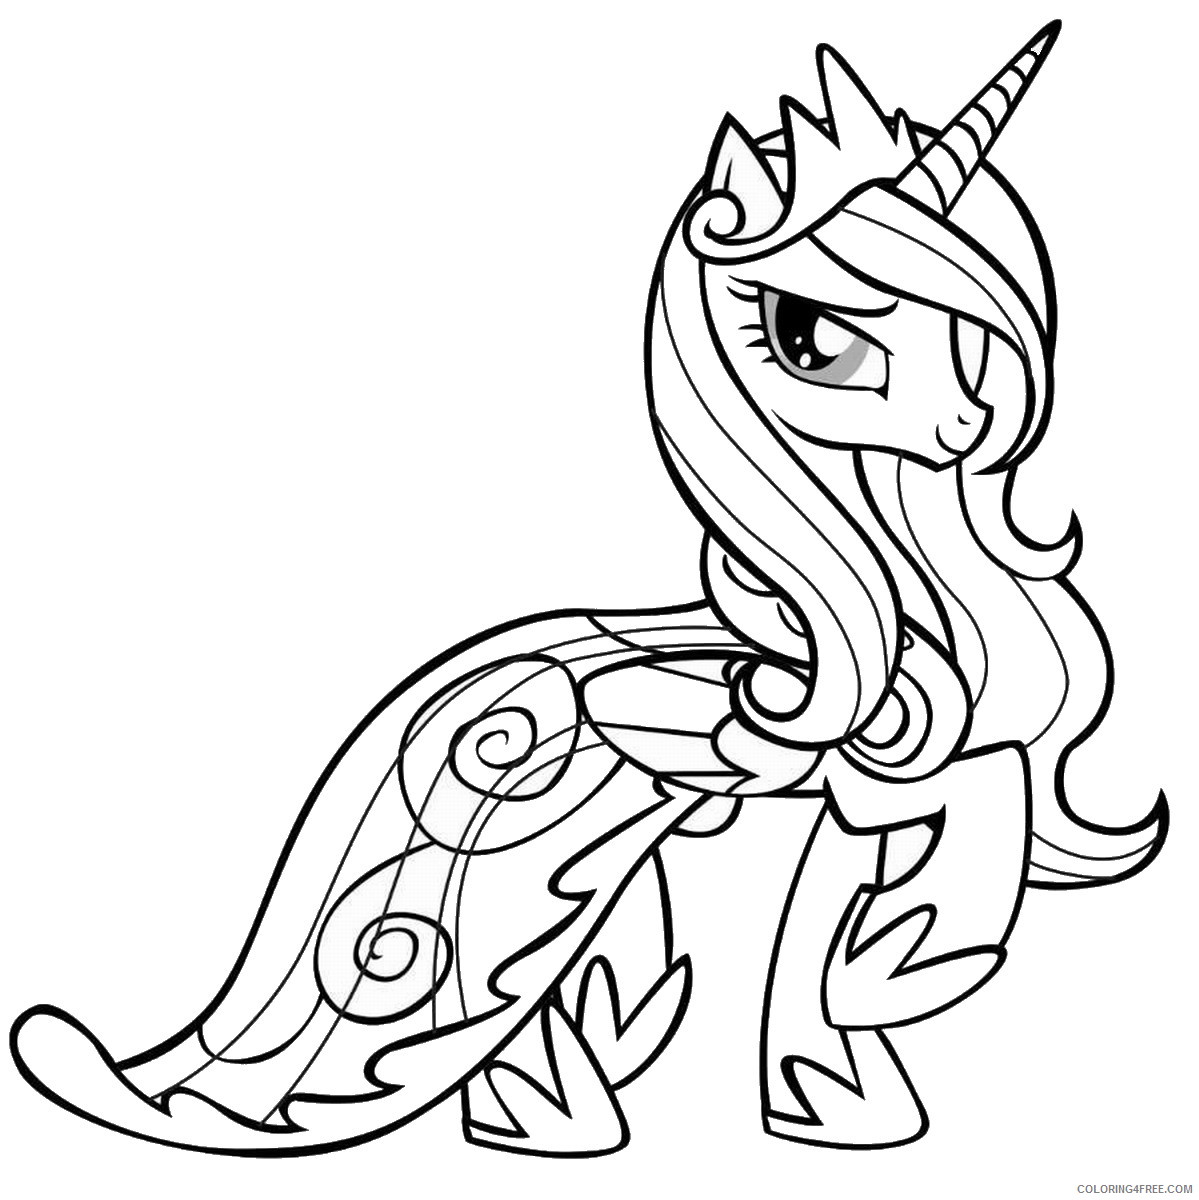 My Little Pony Coloring Pages Cartoons My Little Pony 27 Printable 2020 4471 Coloring4free Coloring4free Com